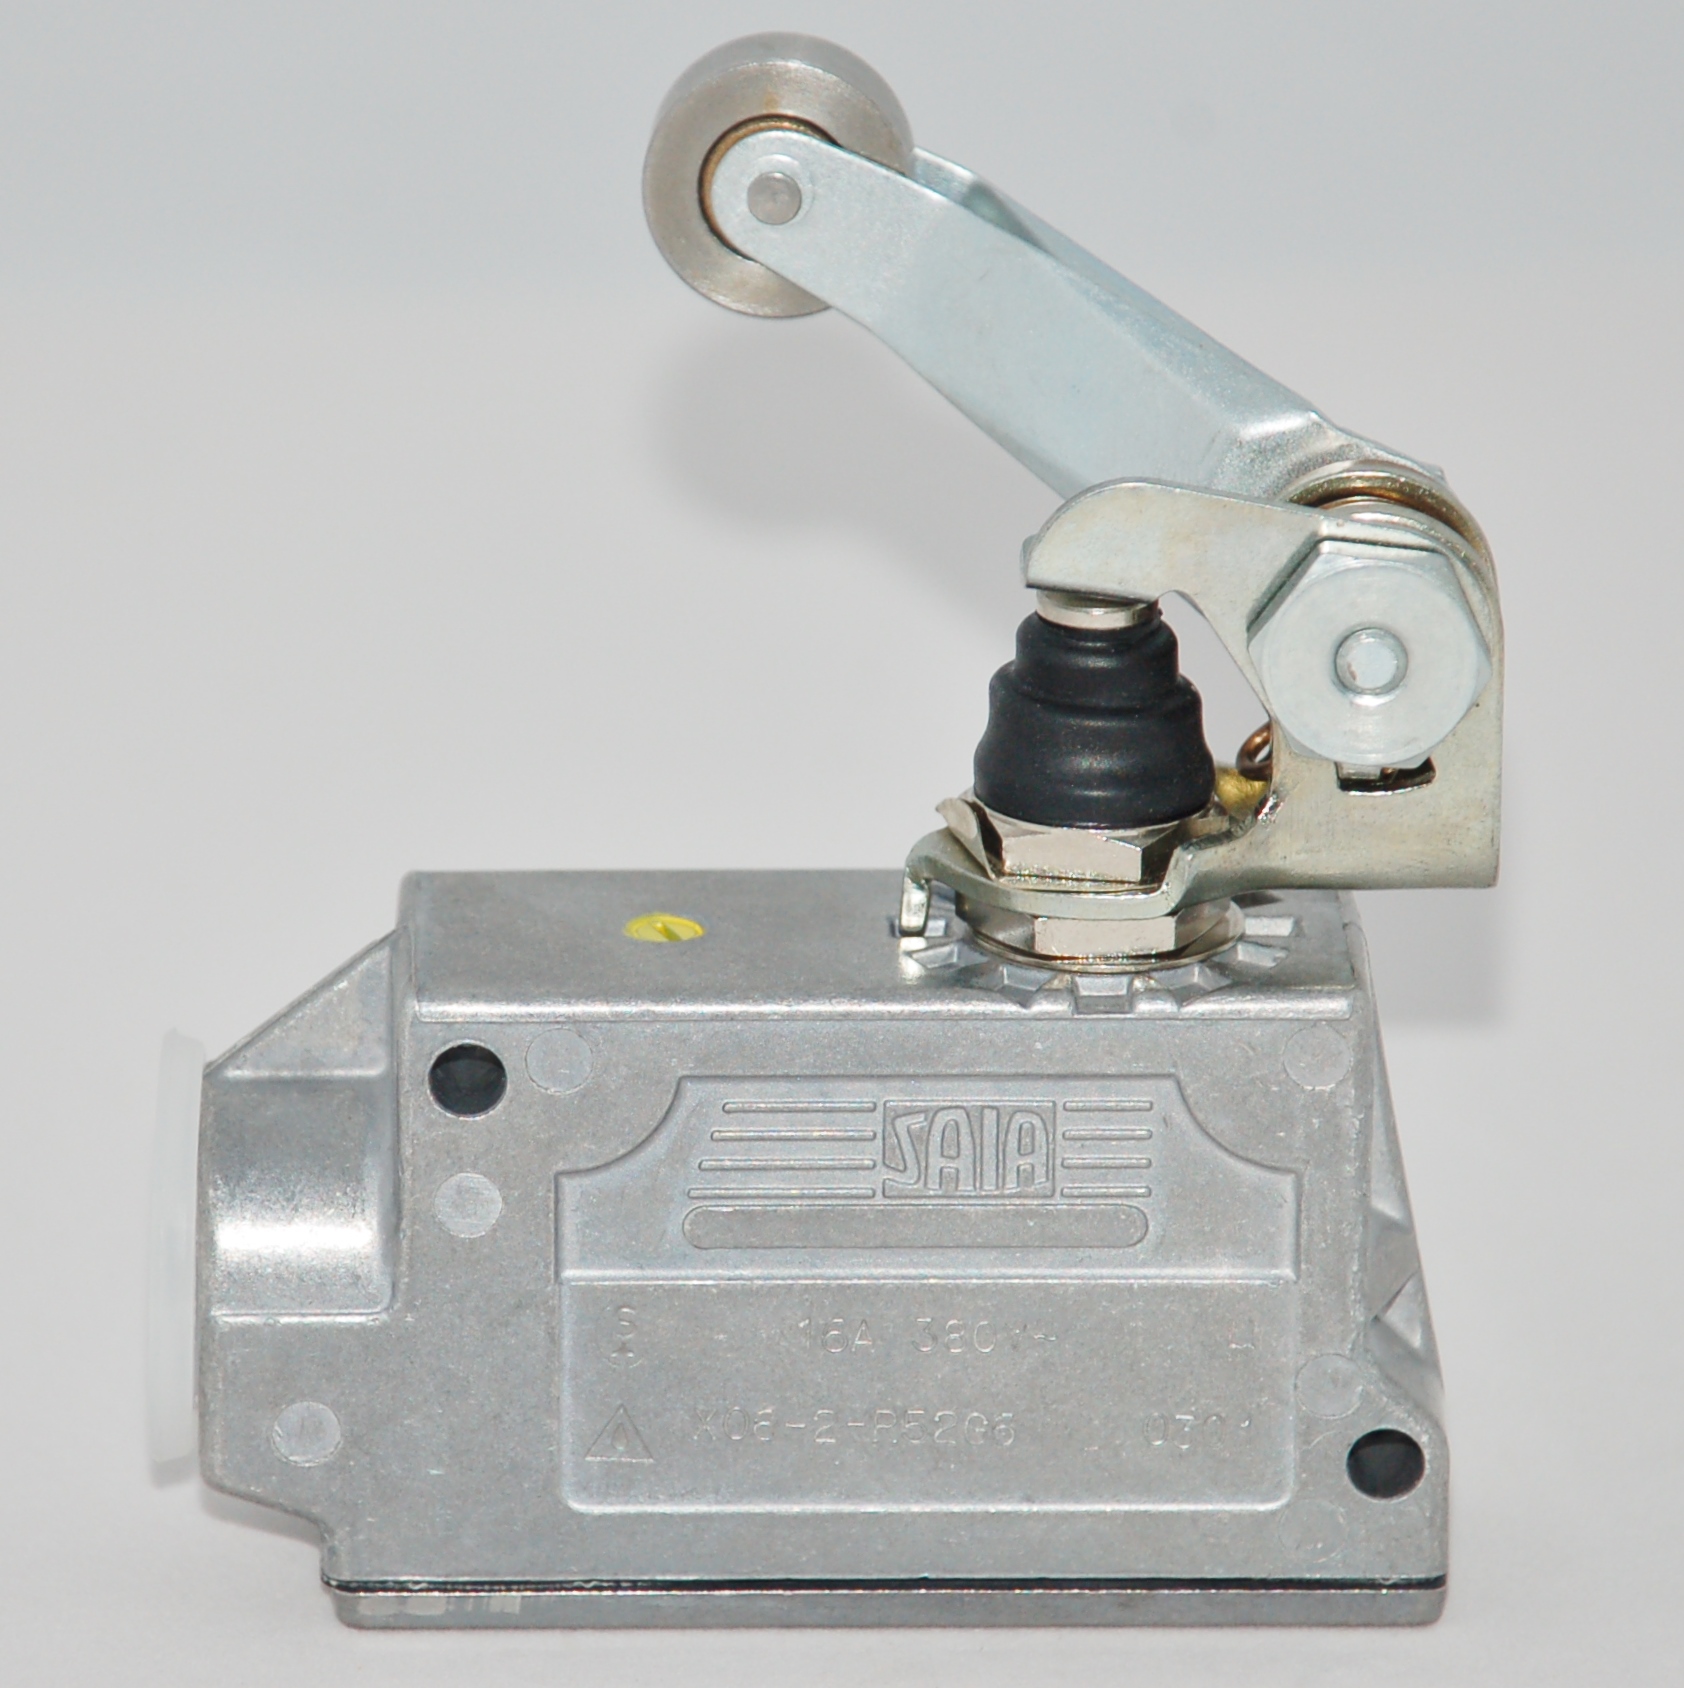 Saia 16a limit switch with offset roller leve...